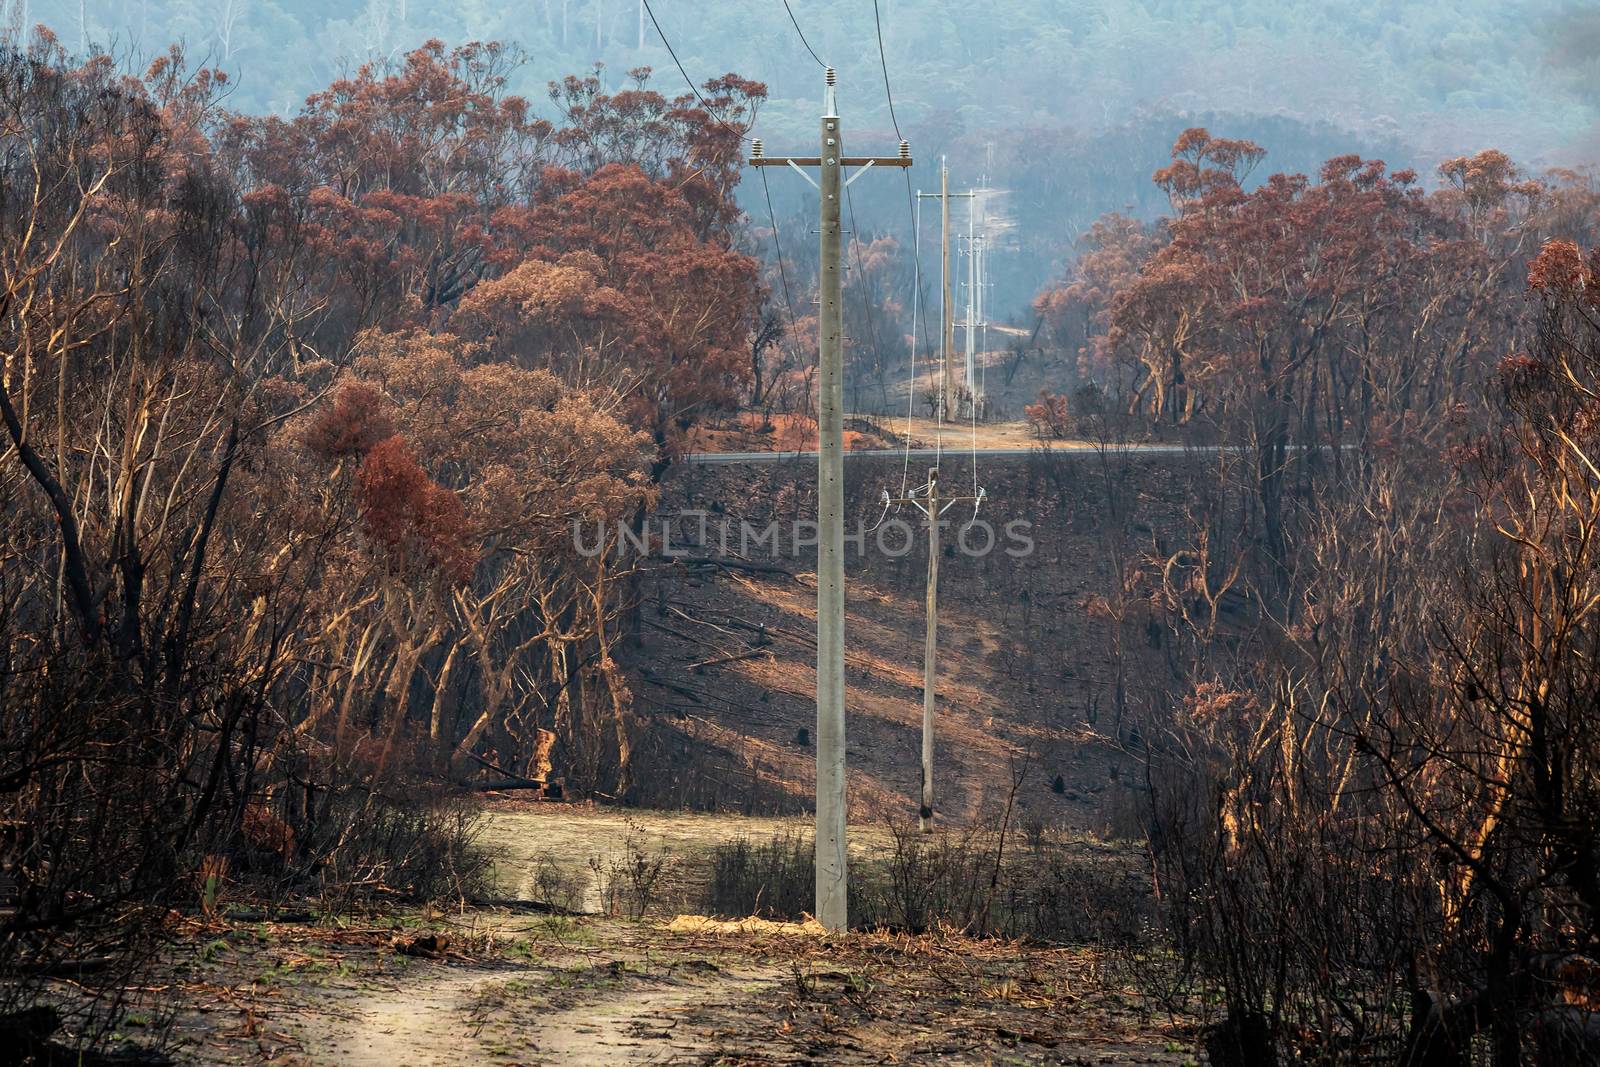 Burnt bush beside powerlines that have been replaced to restore power in Blue Mountains Australia after wild fires 